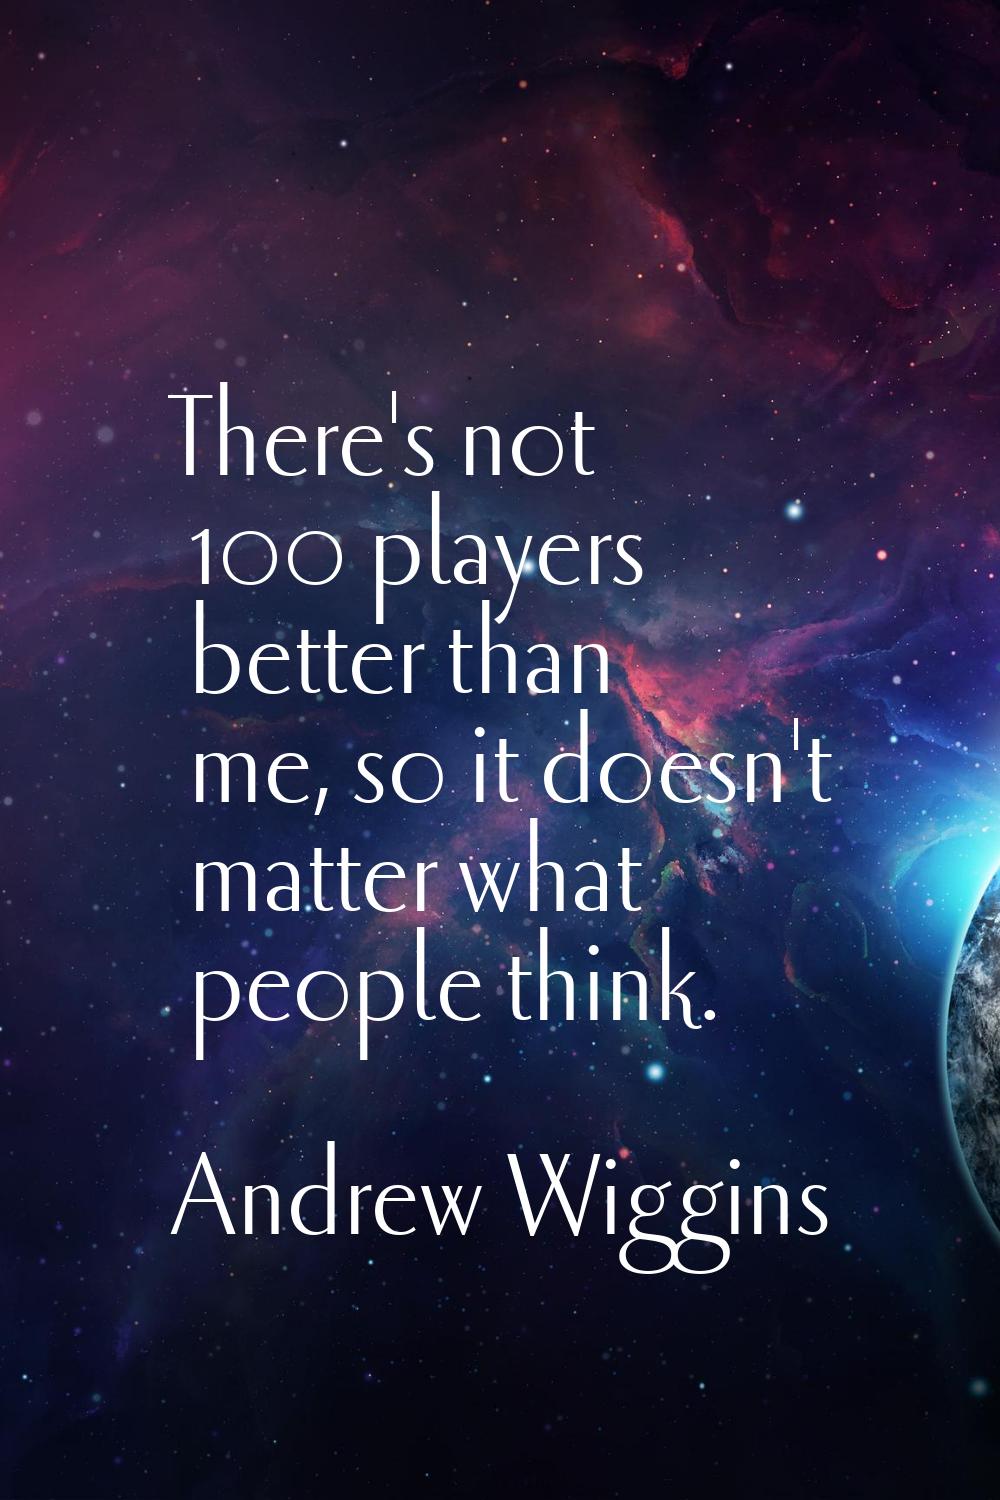 There's not 100 players better than me, so it doesn't matter what people think.